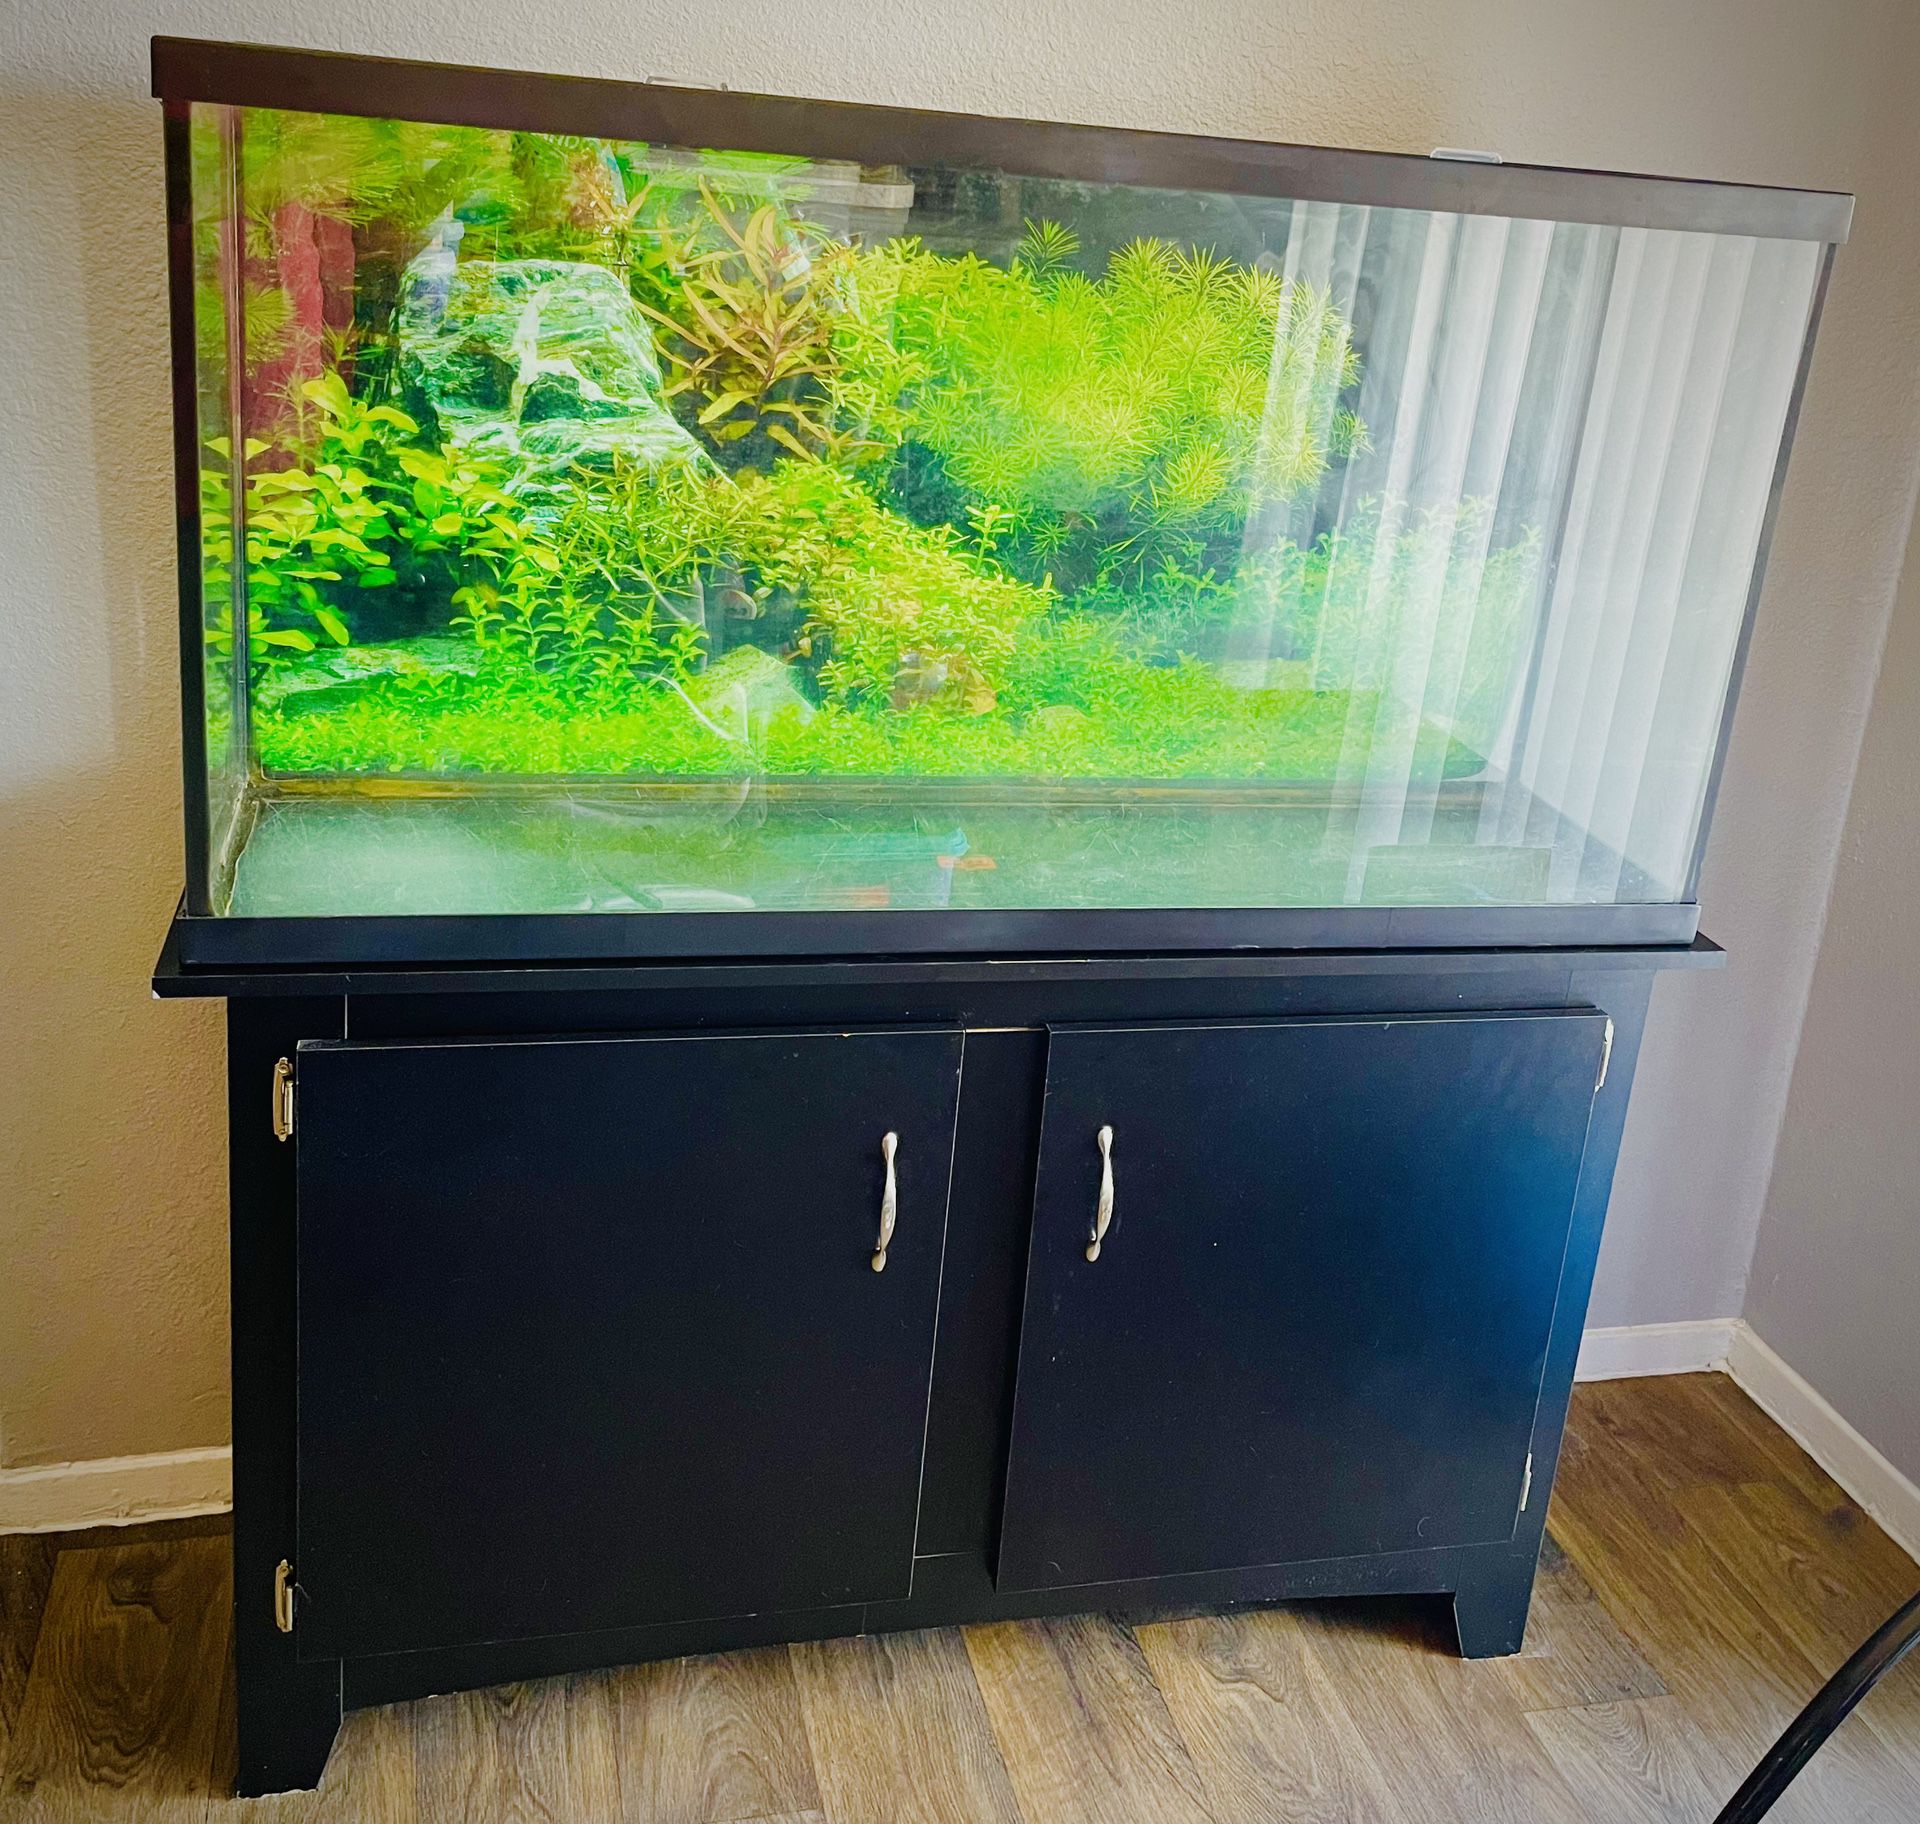 Pick Up Only! 55 Gallon Tank And Stand Plus Penn-plax Cascade Filter And More!